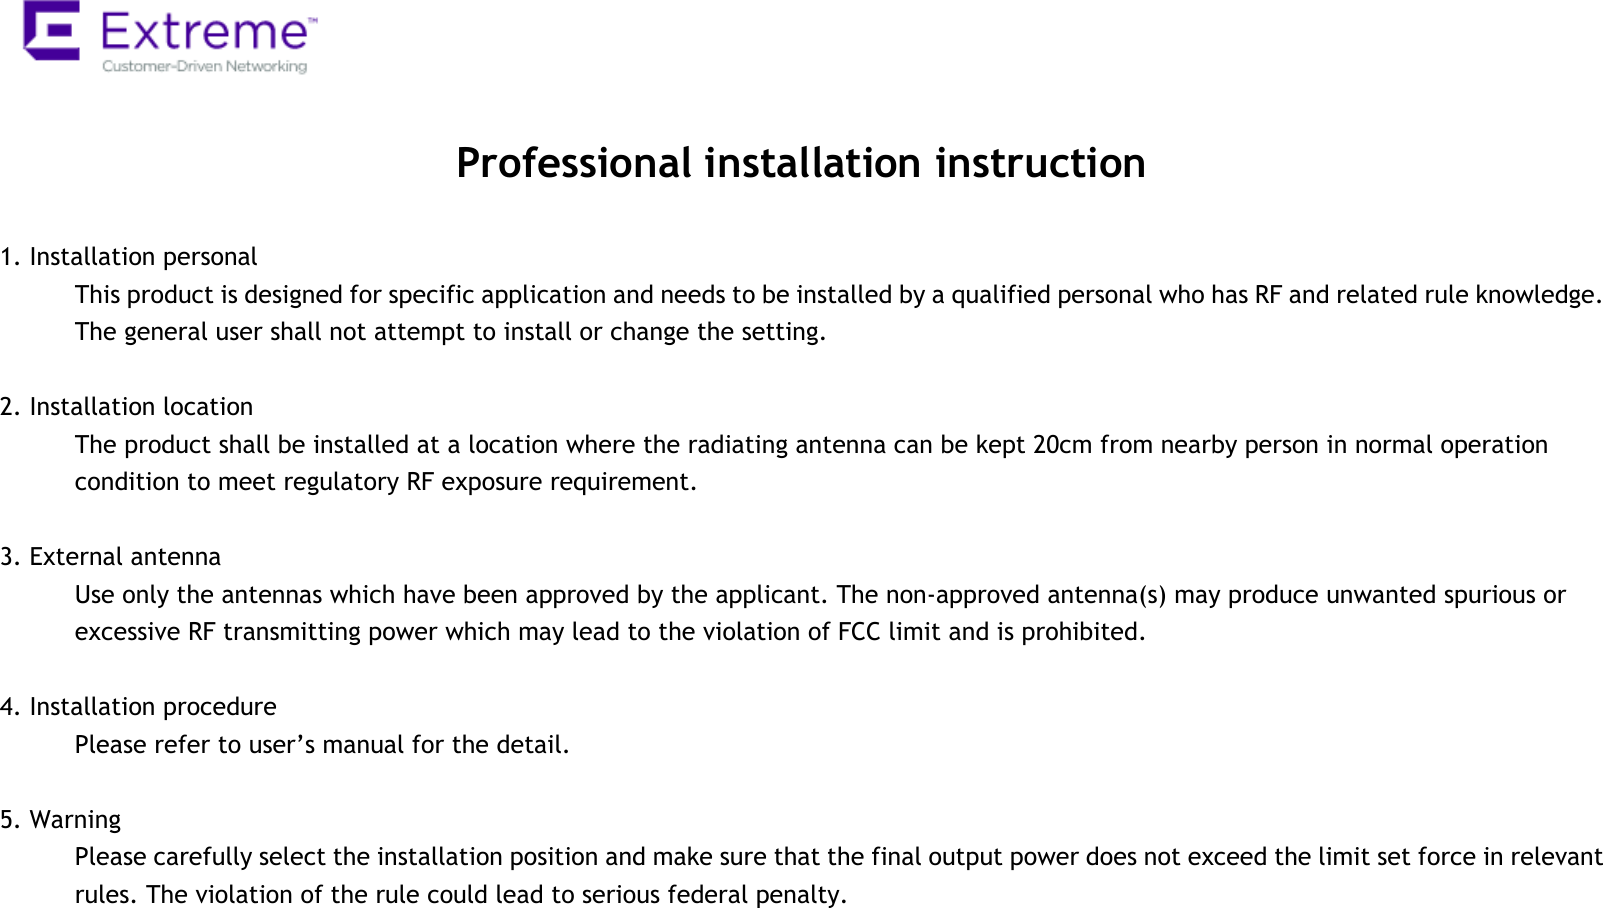   Professional installation instruction  1. Installation personal   This product is designed for specific application and needs to be installed by a qualified personal who has RF and related rule knowledge. The general user shall not attempt to install or change the setting.  2. Installation location   The product shall be installed at a location where the radiating antenna can be kept 20cm from nearby person in normal operation condition to meet regulatory RF exposure requirement.  3. External antenna   Use only the antennas which have been approved by the applicant. The non-approved antenna(s) may produce unwanted spurious or excessive RF transmitting power which may lead to the violation of FCC limit and is prohibited.  4. Installation procedure   Please refer to user’s manual for the detail.  5. Warning   Please carefully select the installation position and make sure that the final output power does not exceed the limit set force in relevant rules. The violation of the rule could lead to serious federal penalty.  